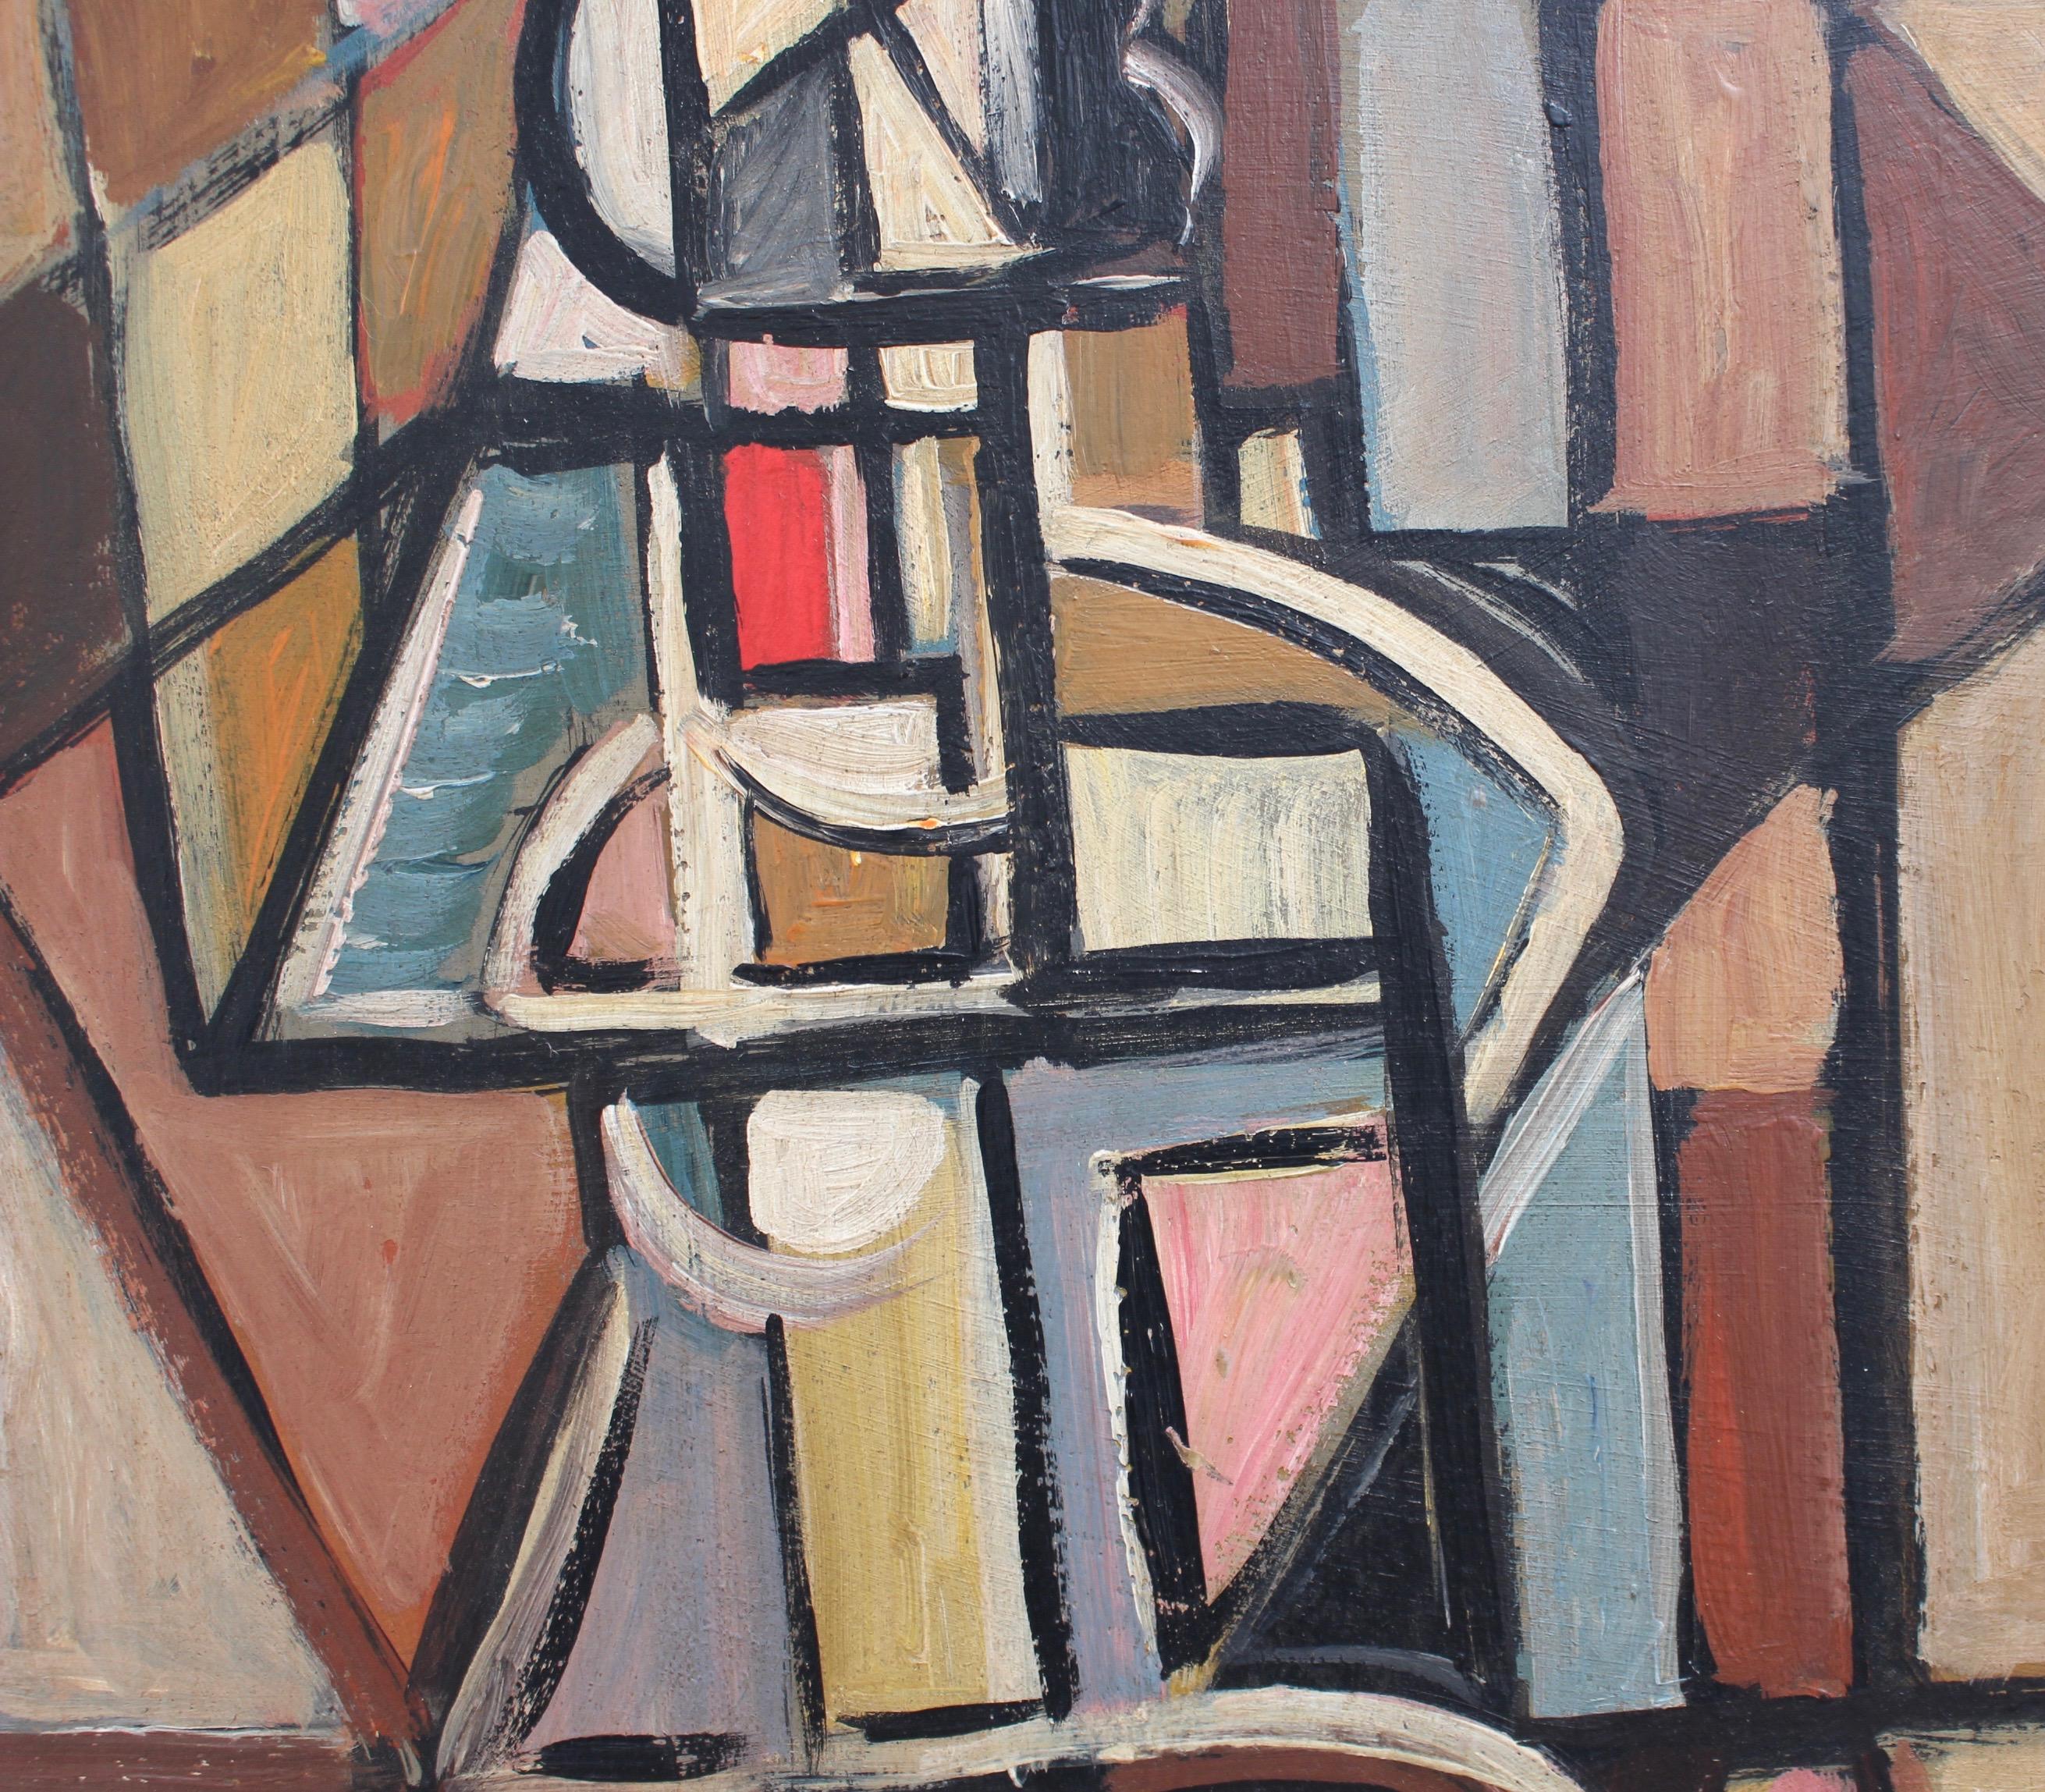 Cubist Figure 1, oil on board, by STM (circa 1960s - 70s). A stunning Modern painting in a small series of two works by artist with the initials STM. Clearly inspired by Picasso and Braque, the artist used angles, lines and vibrant colours to create